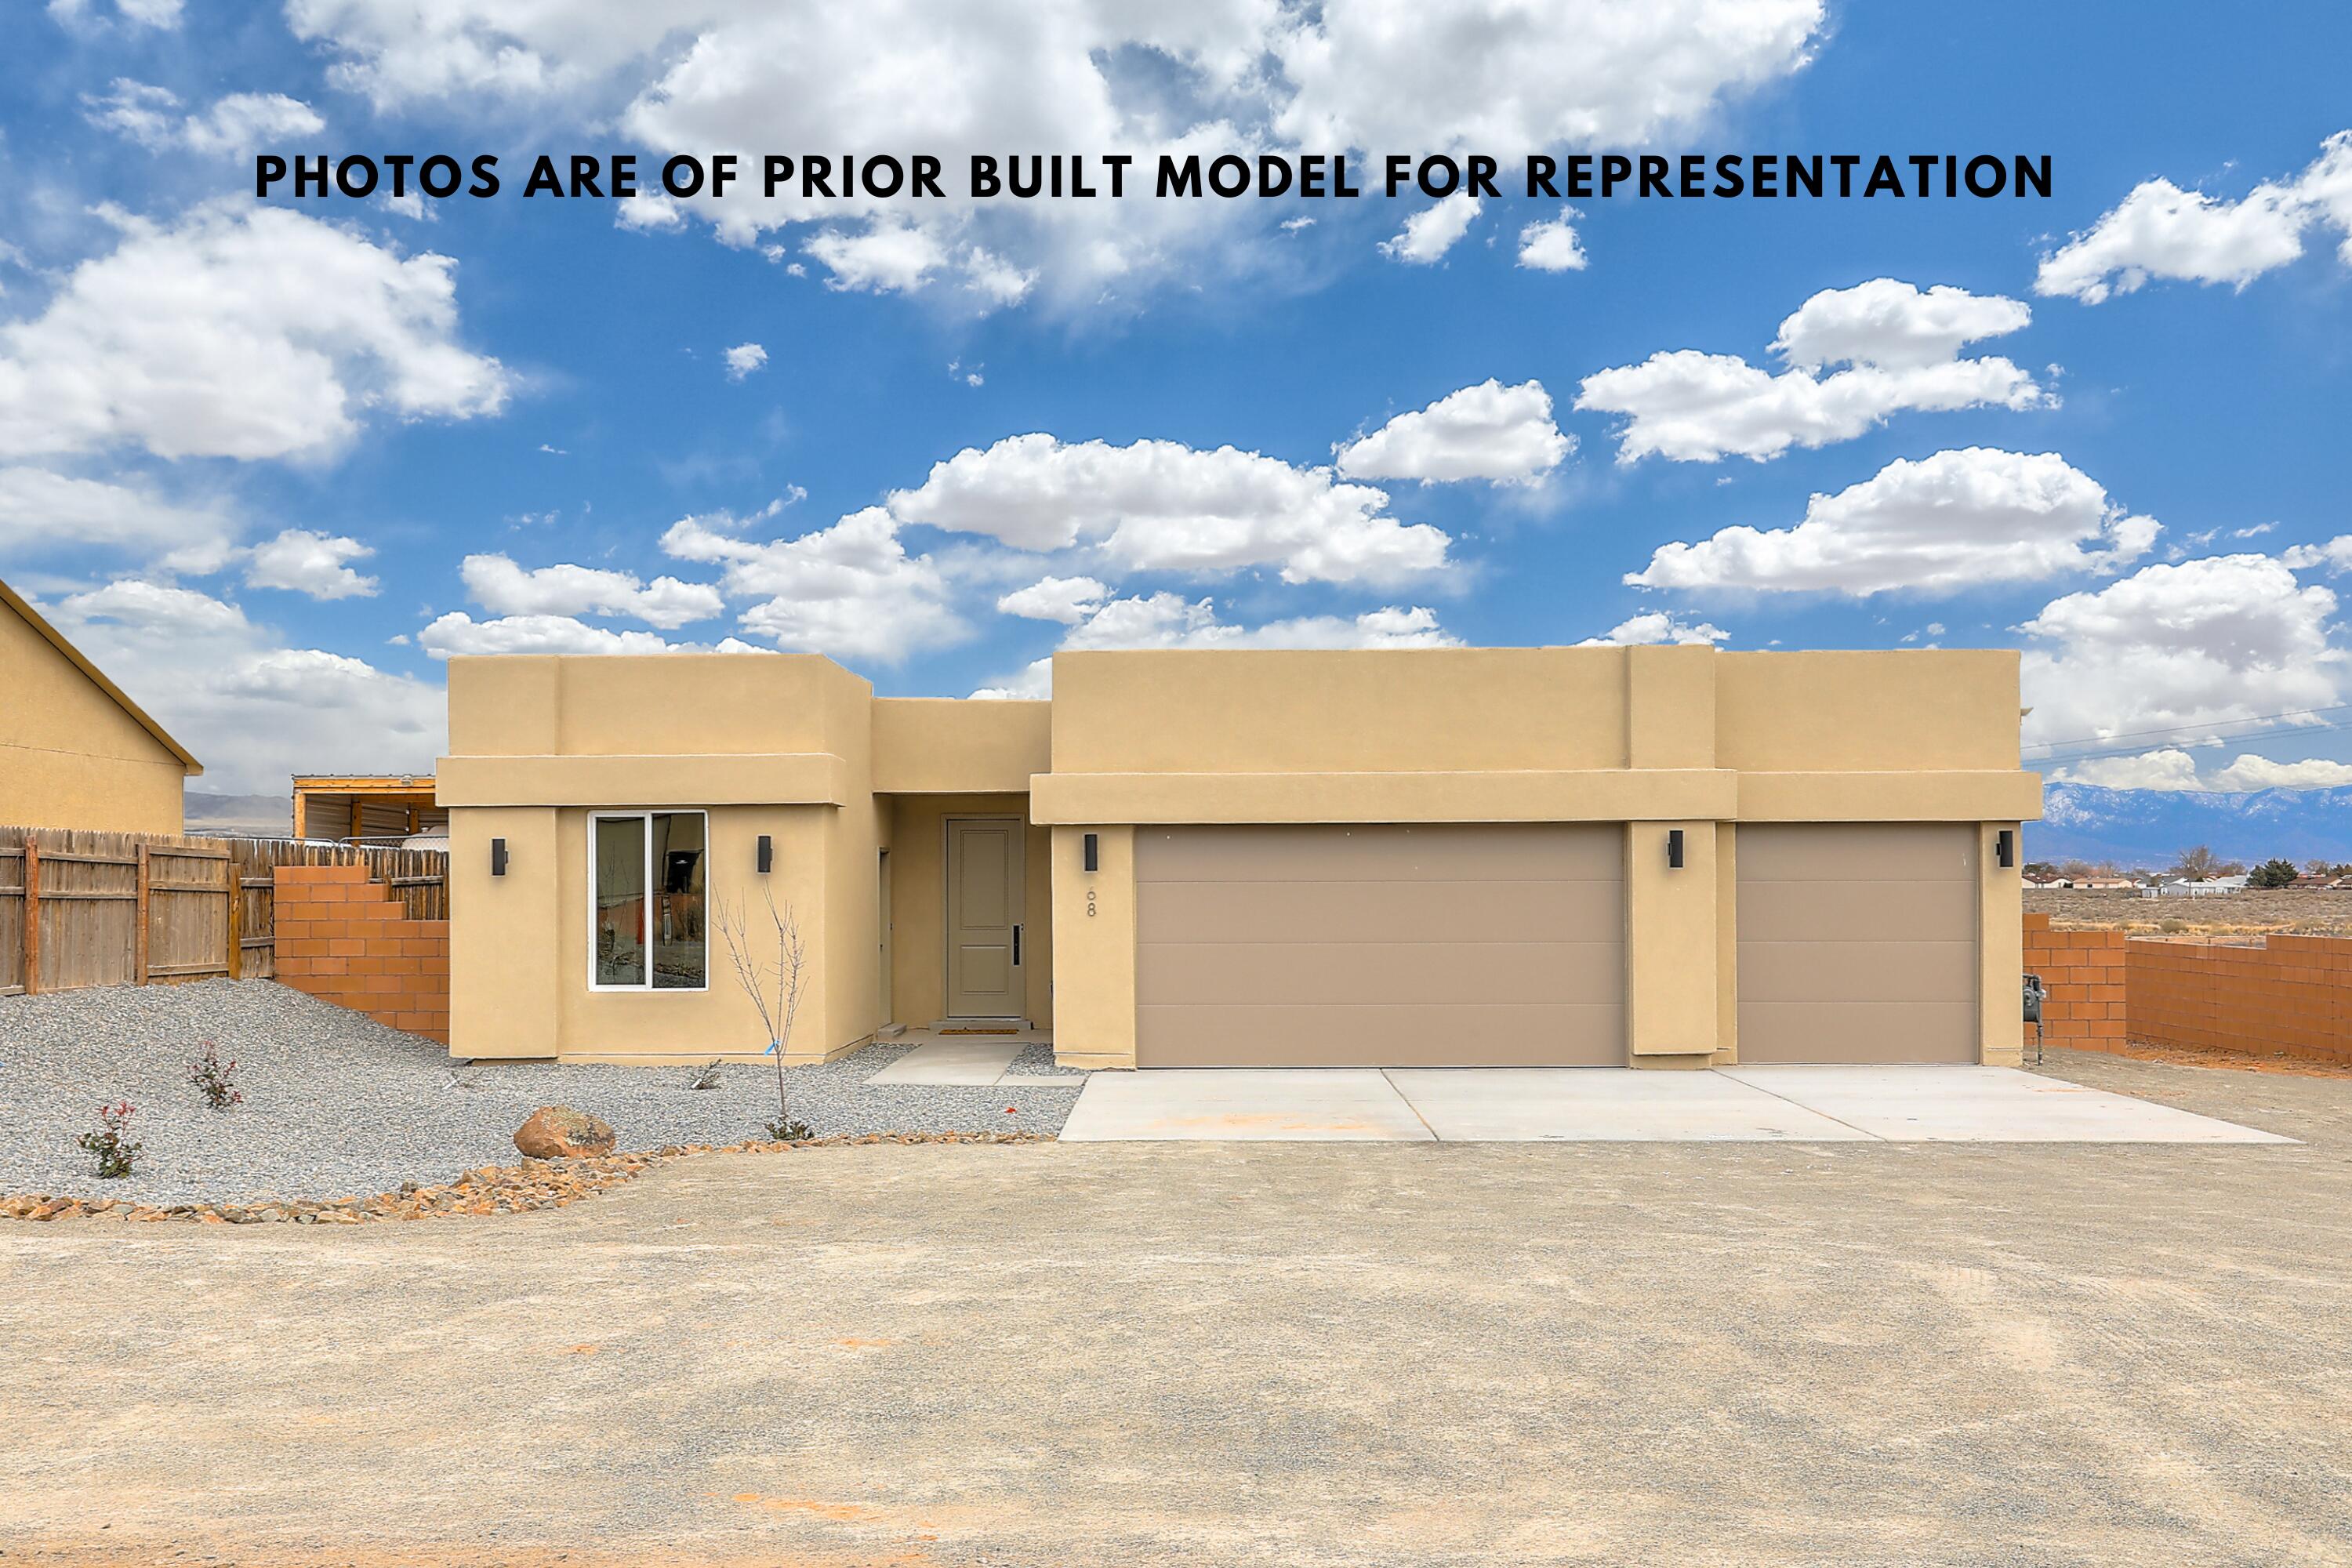 Fellowship Homes is NOW offering - 2 homes on 1 lot in Rio Rancho! True Multi-generation Living. The main home features 4 bedrooms, 3 bathrooms and a 3-car garage on 1/2 acre lot! 4th bedroom is a Flex-suite which includes full bathroom, separate entrance, and stubbed for kitchenette perfect for home business or second living space! The 2nd home is 990 sqft and features 2 bedrooms, 1 bath, and a single car garage. Each home having their own separate walled in yard spaces for privacy but also a skip and jump away. Designed with an efficient layout and modern amenities and sleek finishes. Plenty upgraded features: chefs kitchen, concrete floors, refrigerated air, blown-in insulation, low-e windows and more! This property will be completed August 2024 and ready fro new owners to move in!